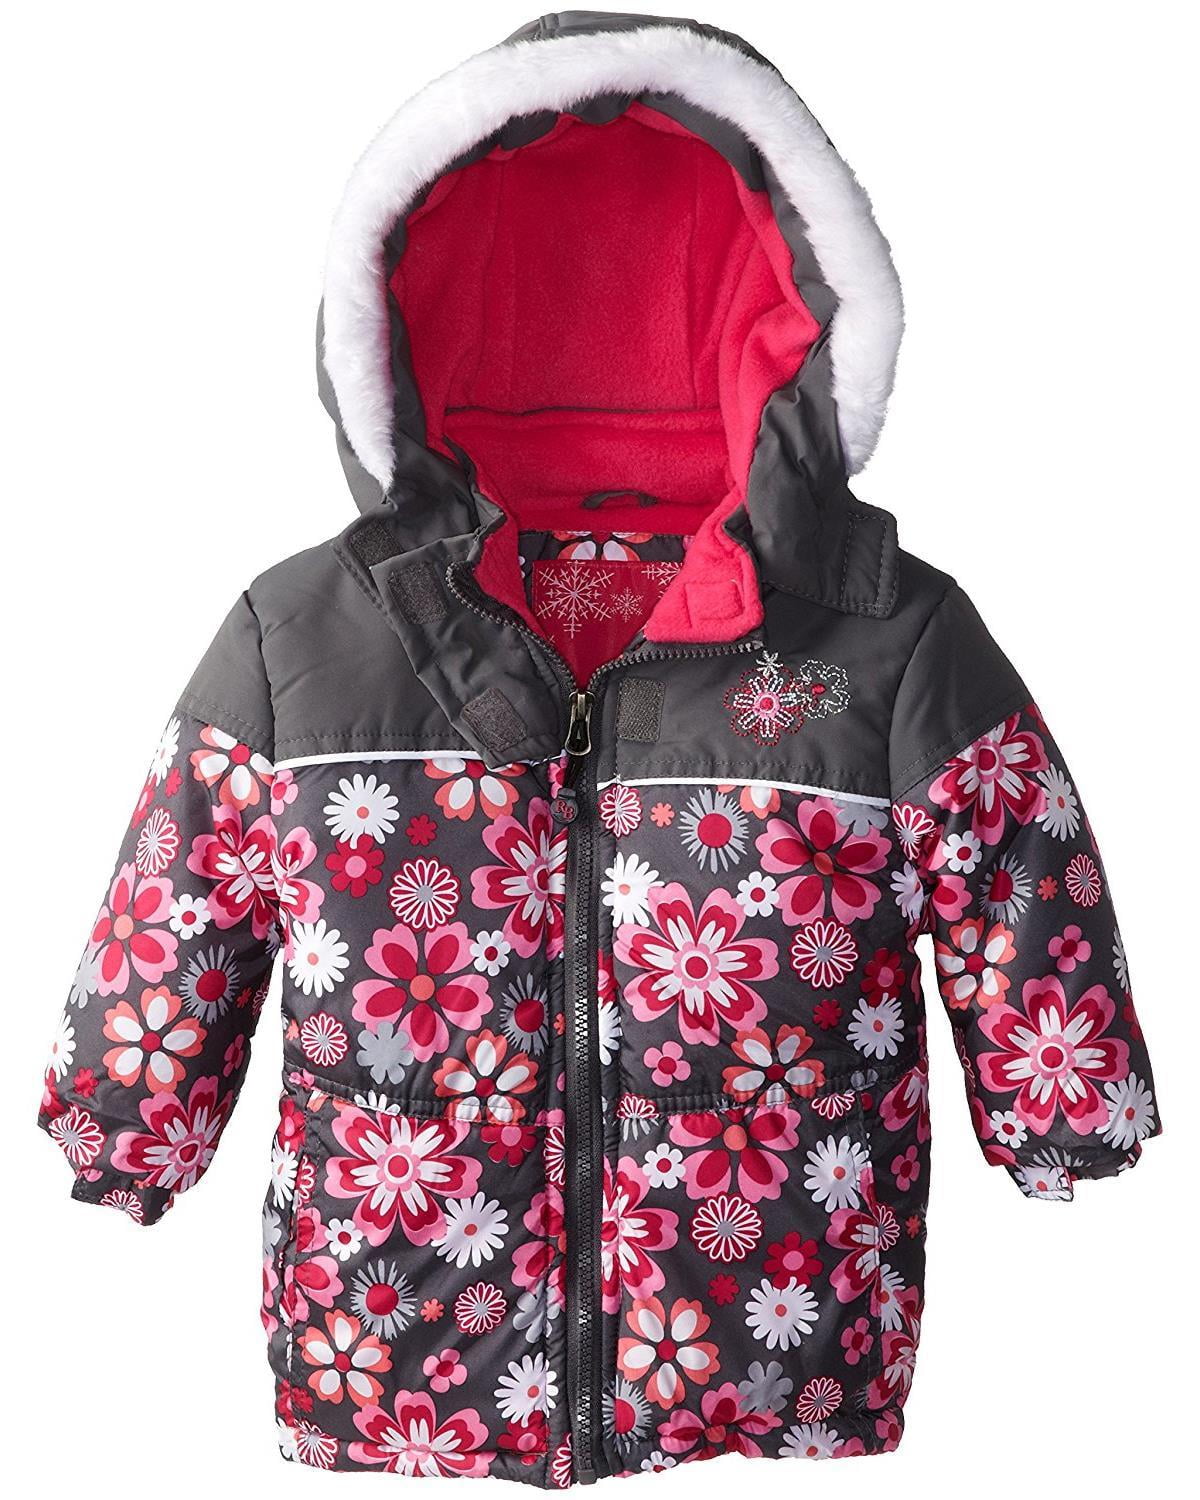 Carter's Girls Olive & Pink Parka Outerwear Jacket Size 2T 3T 4T 4 5/6 6X 